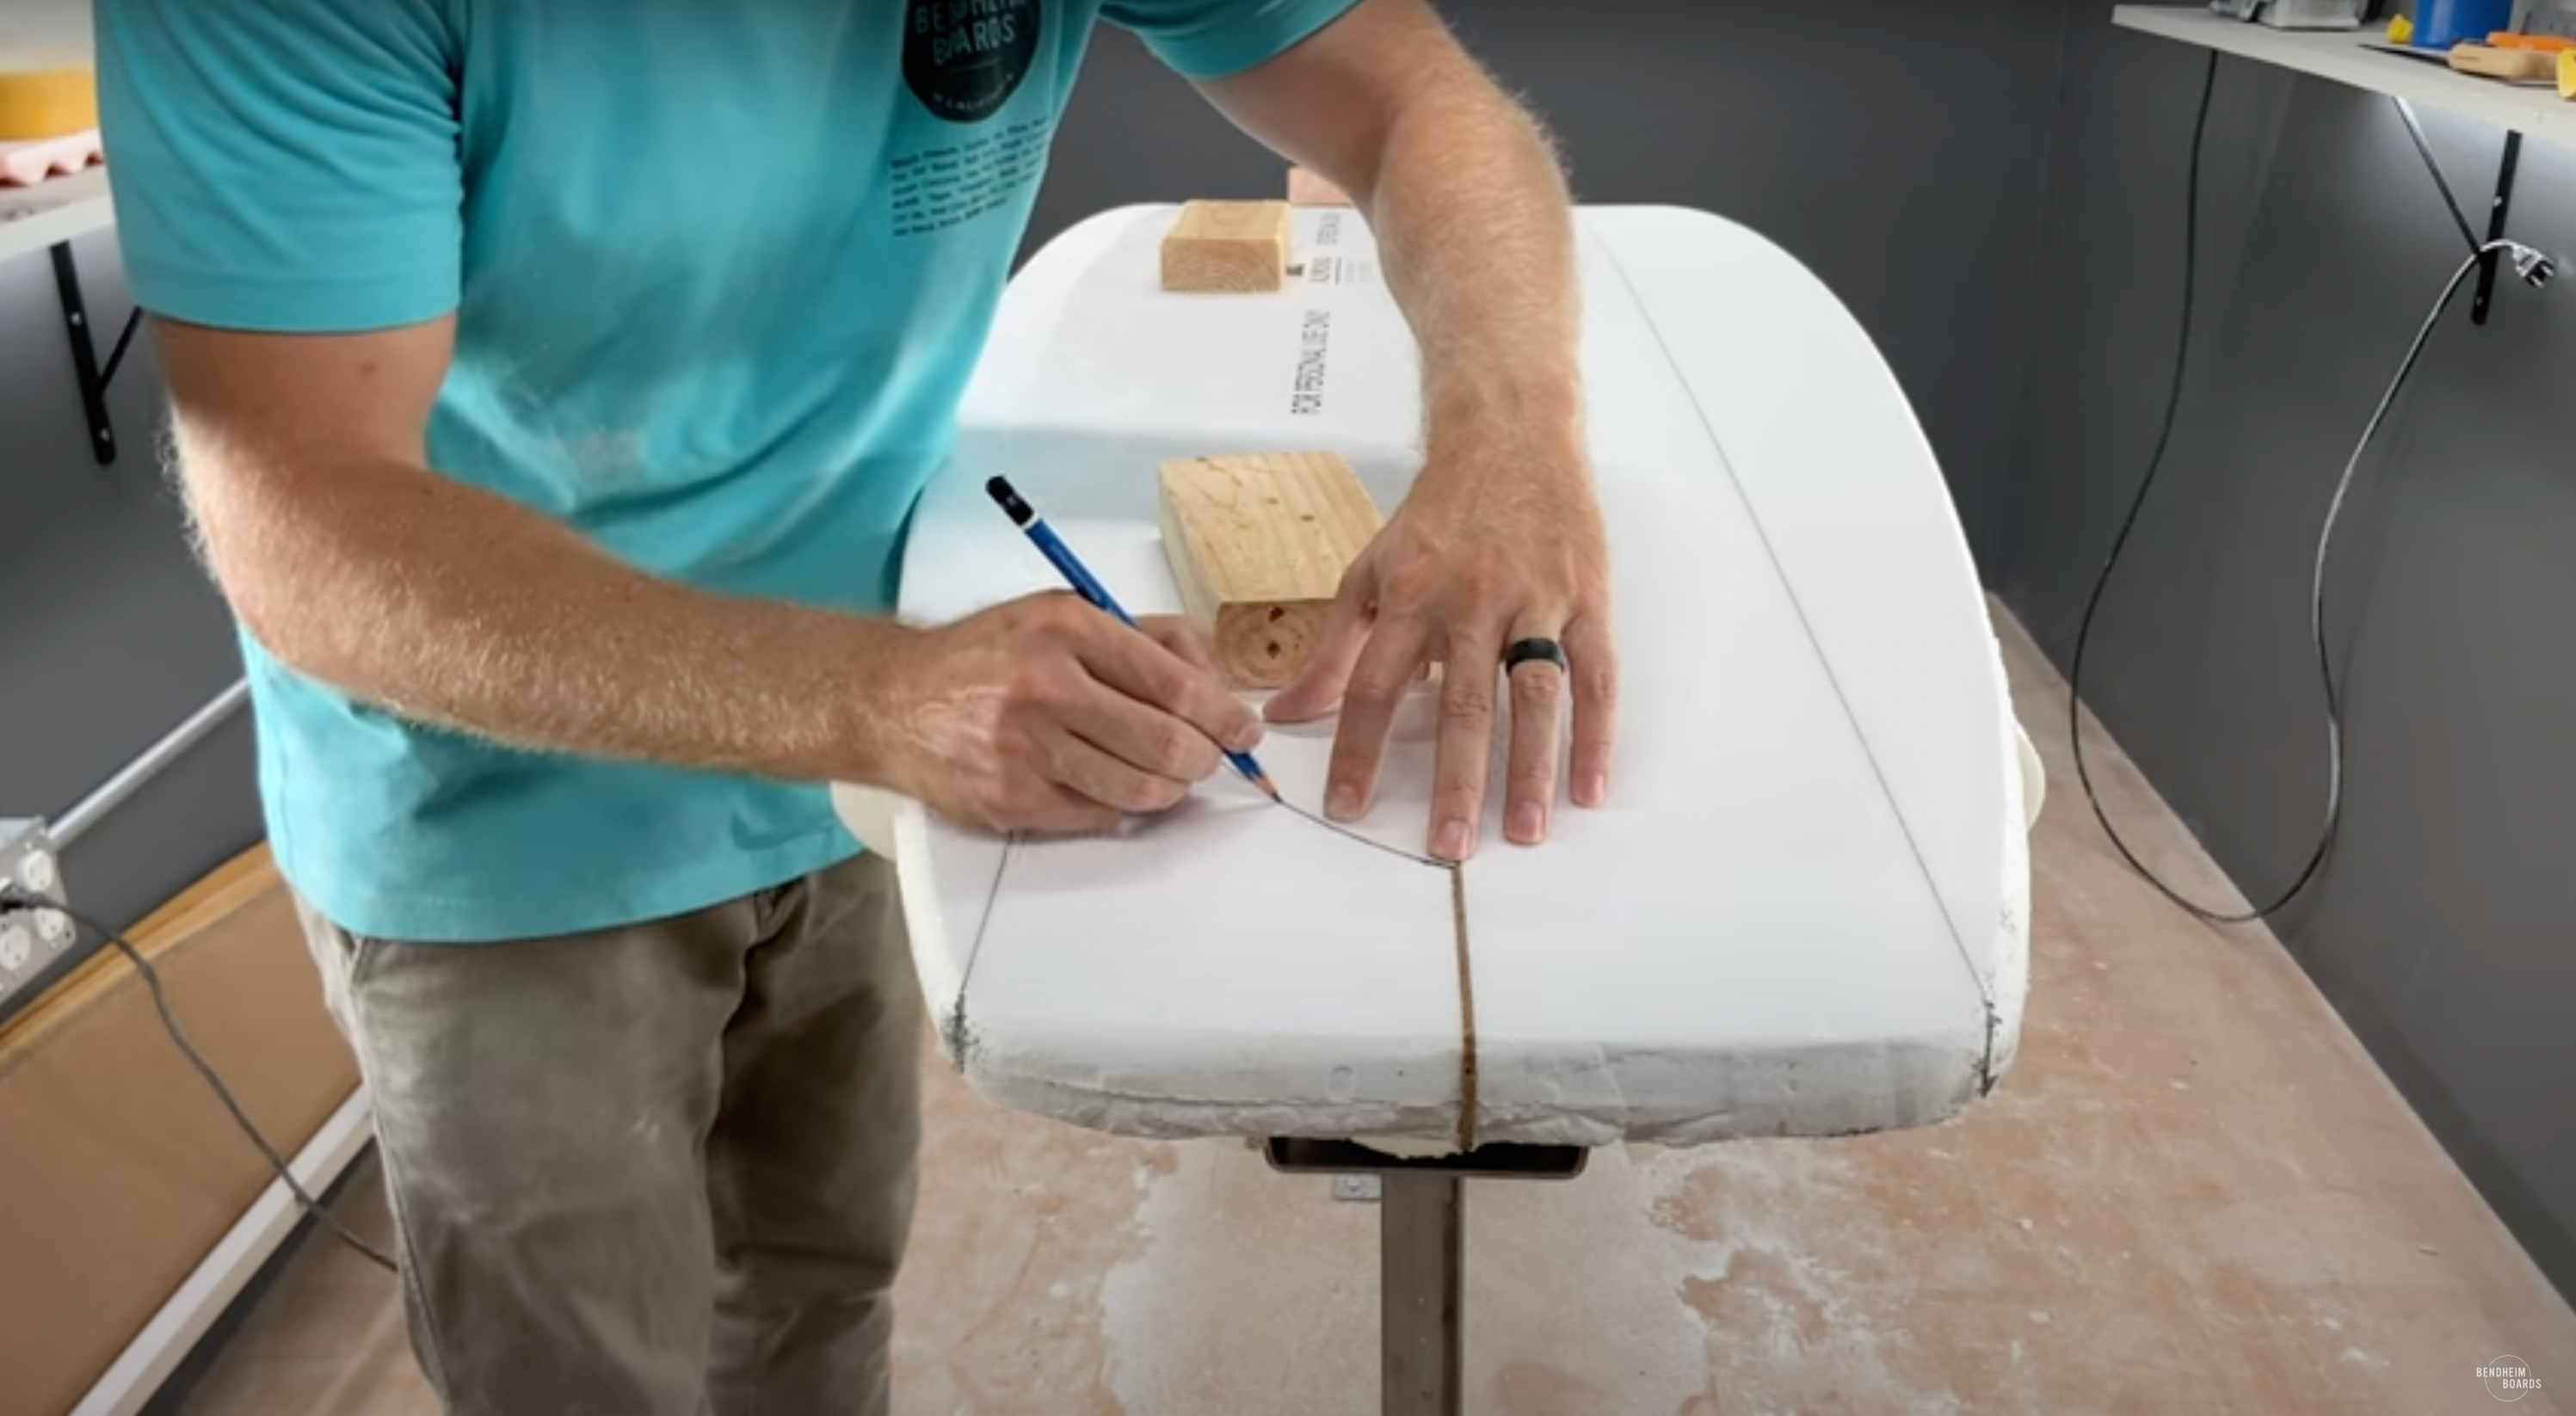 Interested in Shaping A Surfboard?